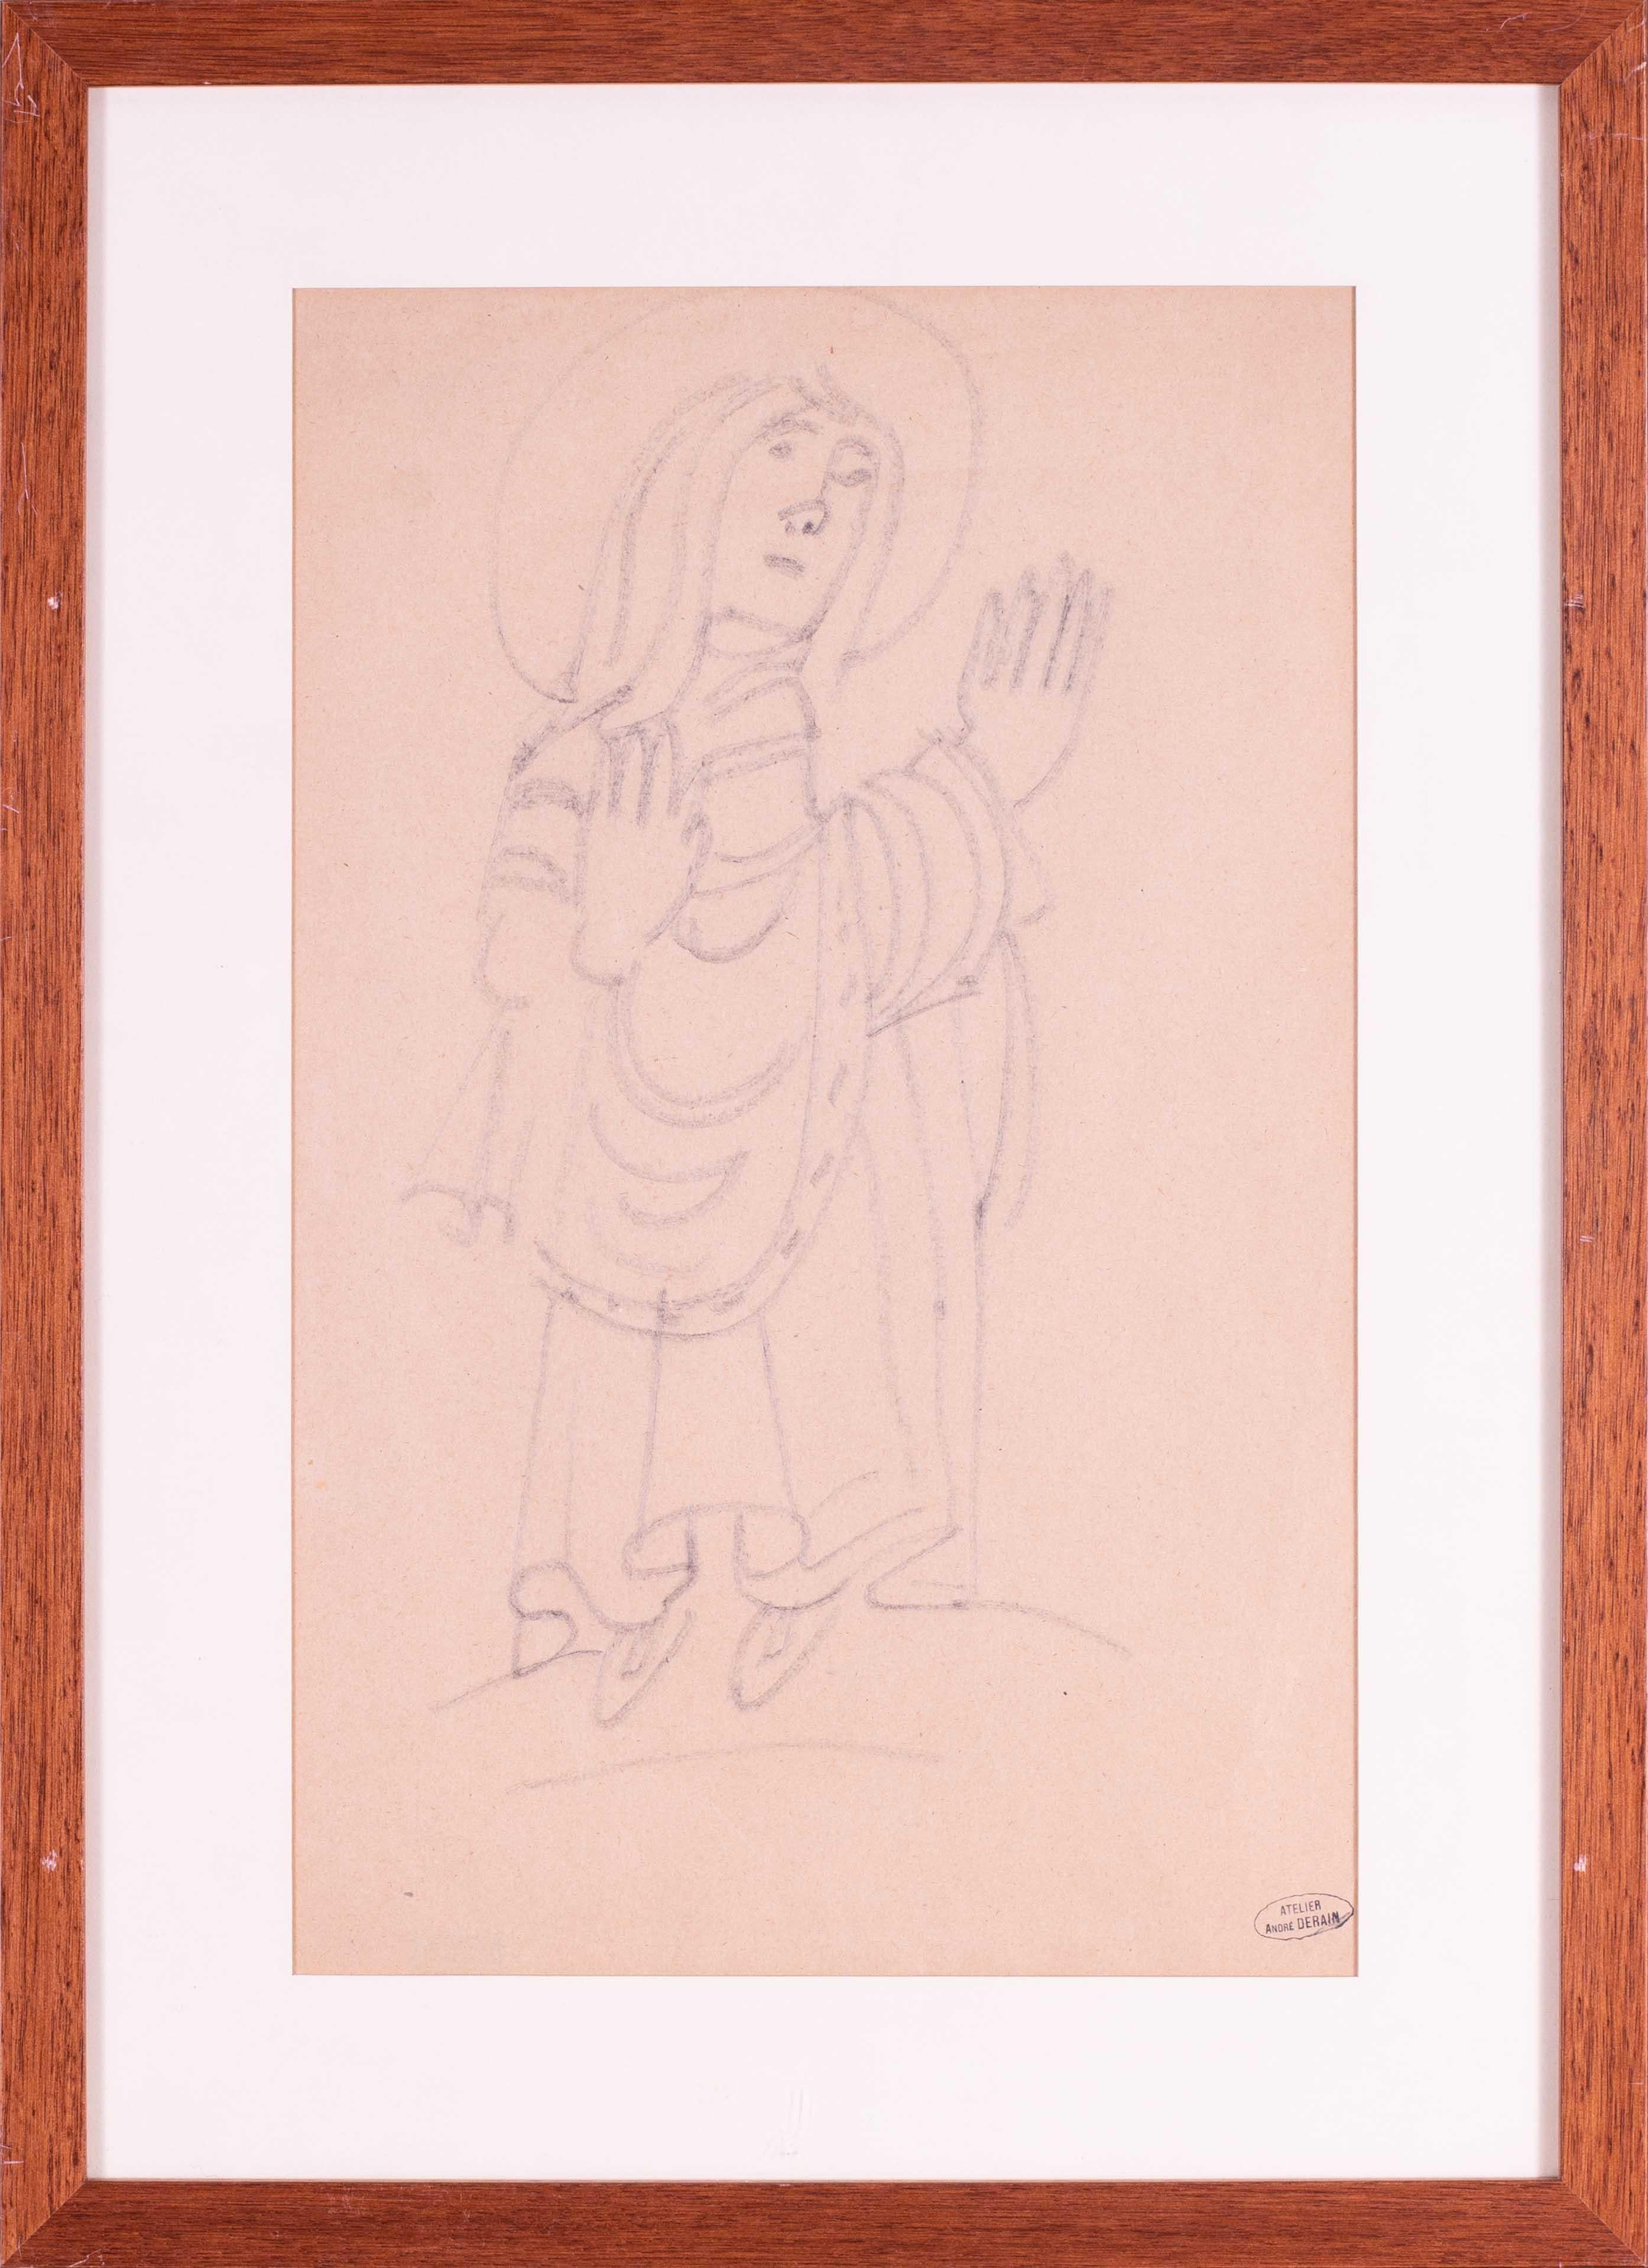 Early 20th Century French Fauvist drawing by Andre Derain of a Saint